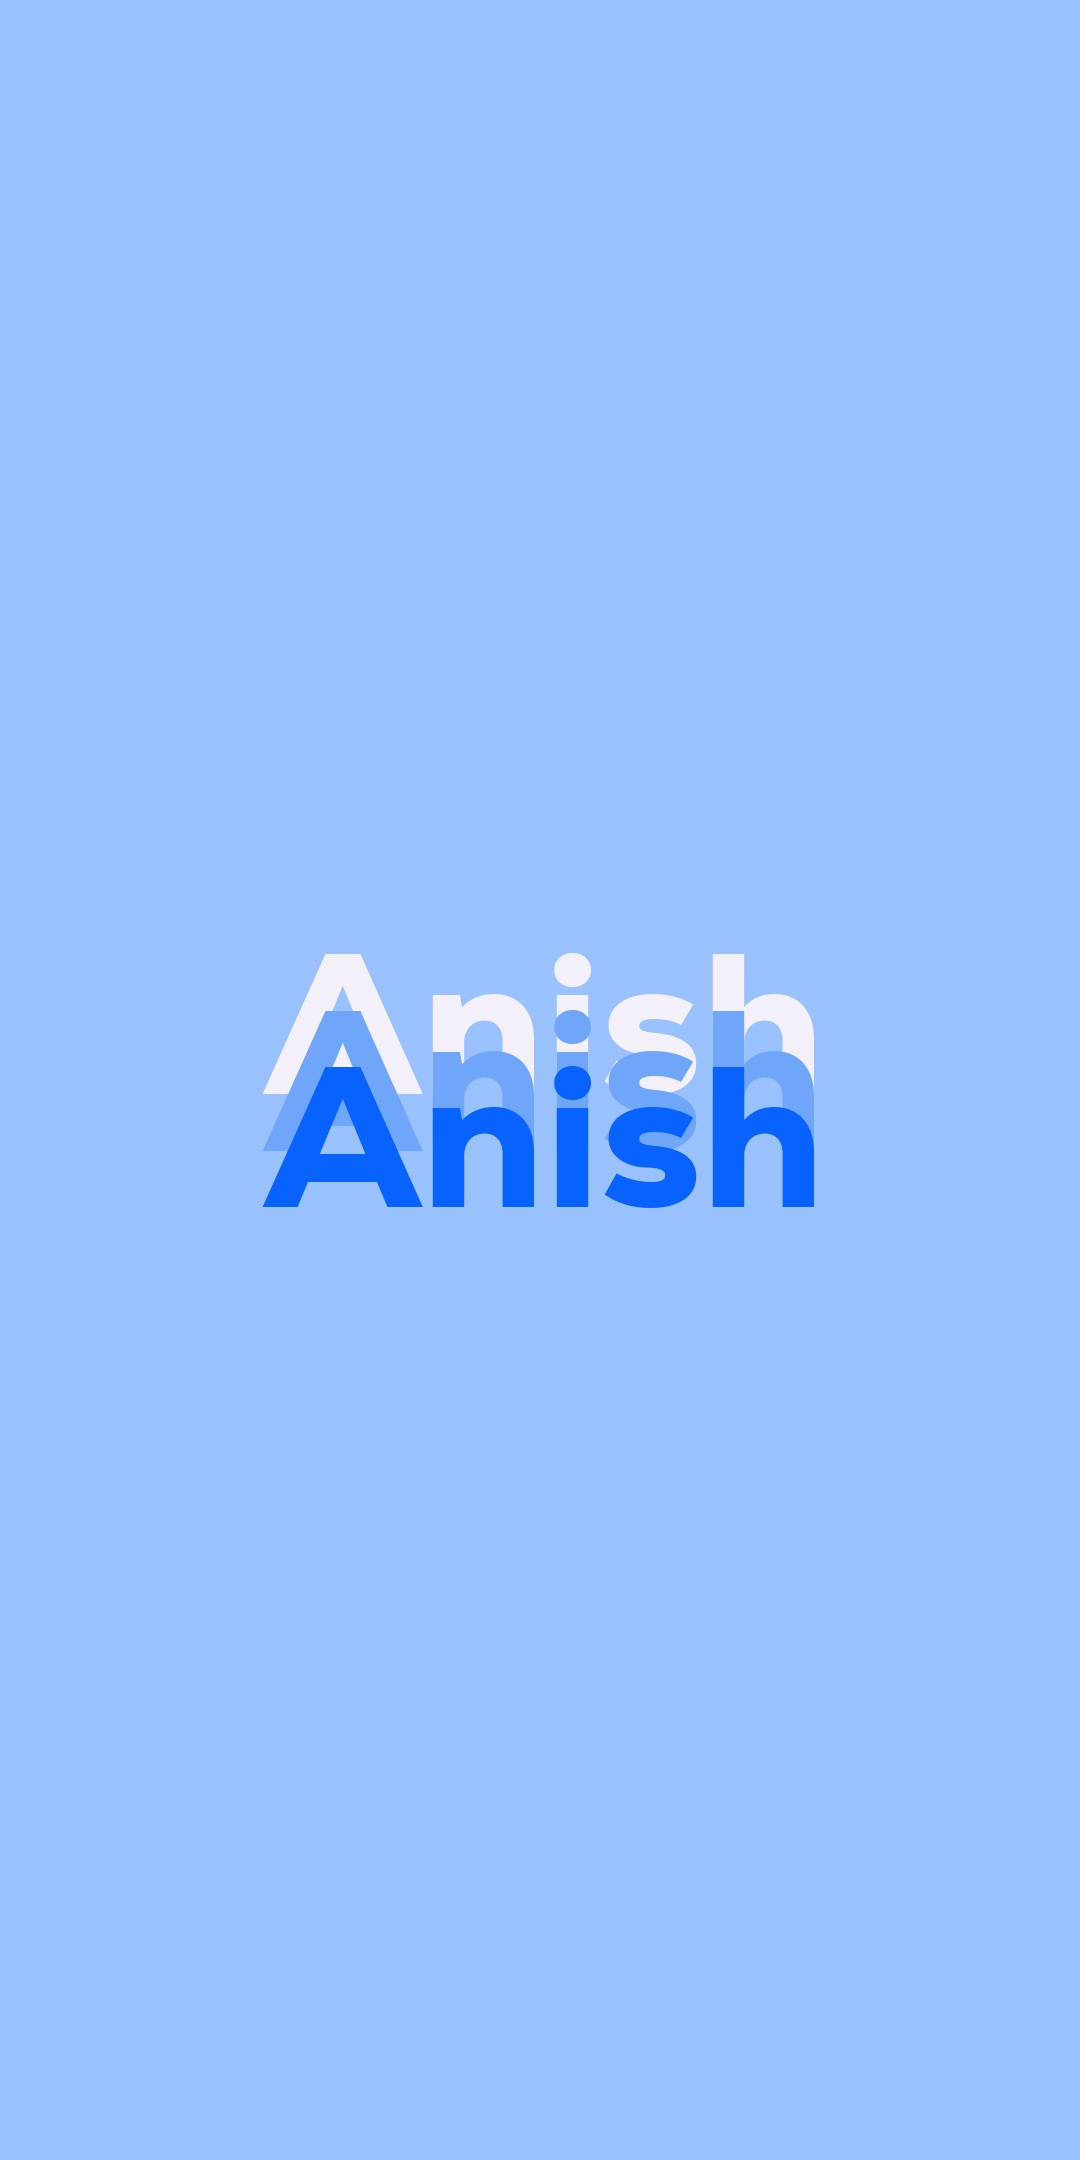 Learn how to Sign the Name Anish Stylishly in Cursive Writing - YouTube